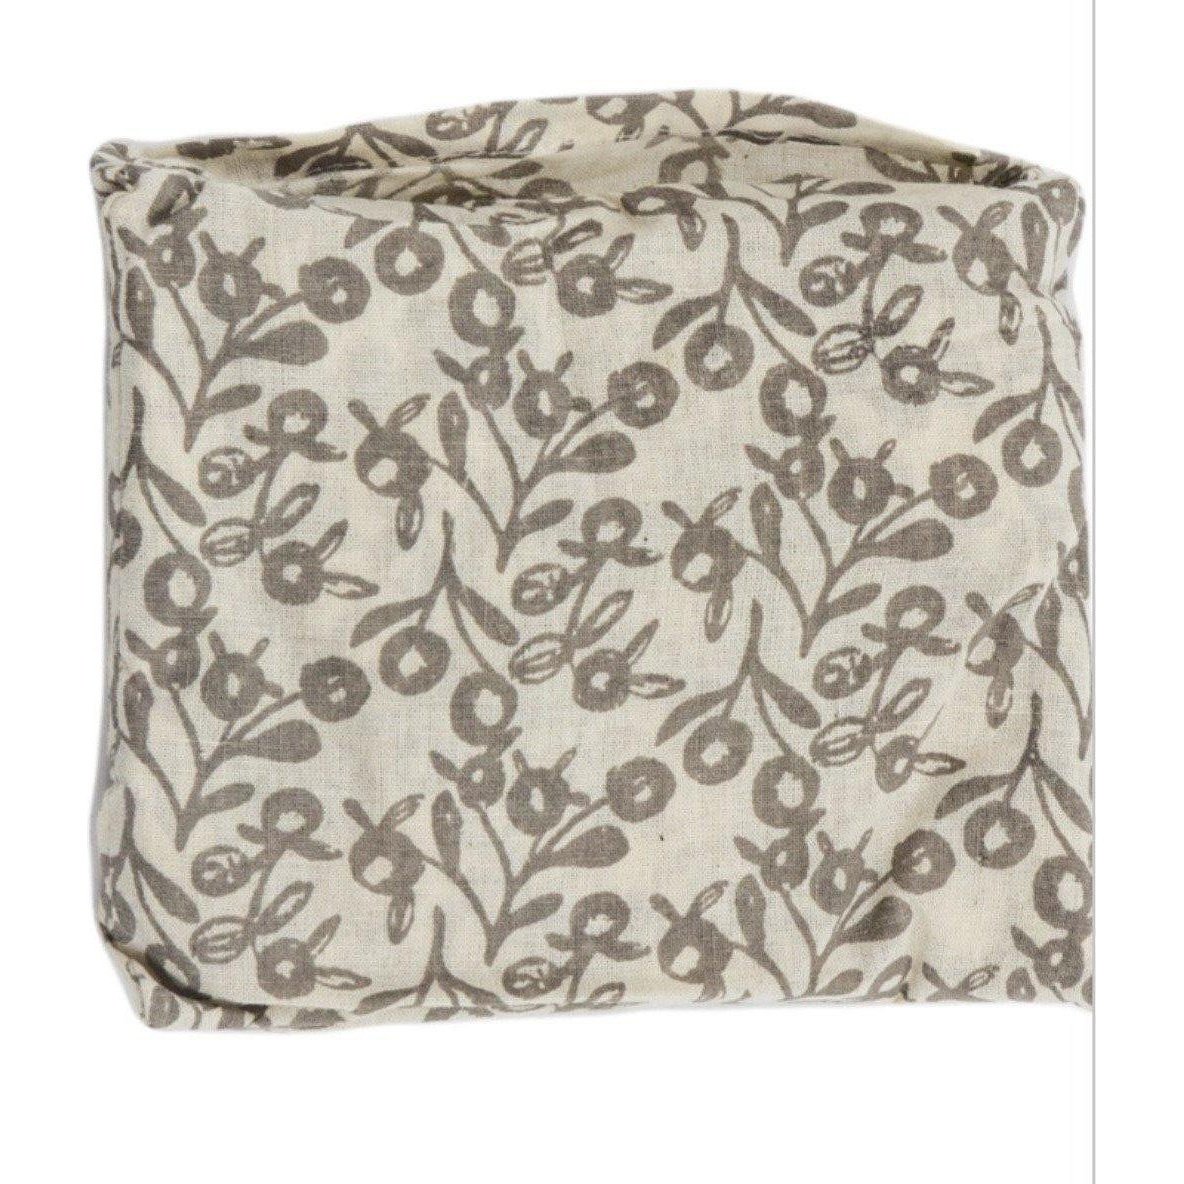 100% Cotton Flora Bag - Lilly Pilly Taupe